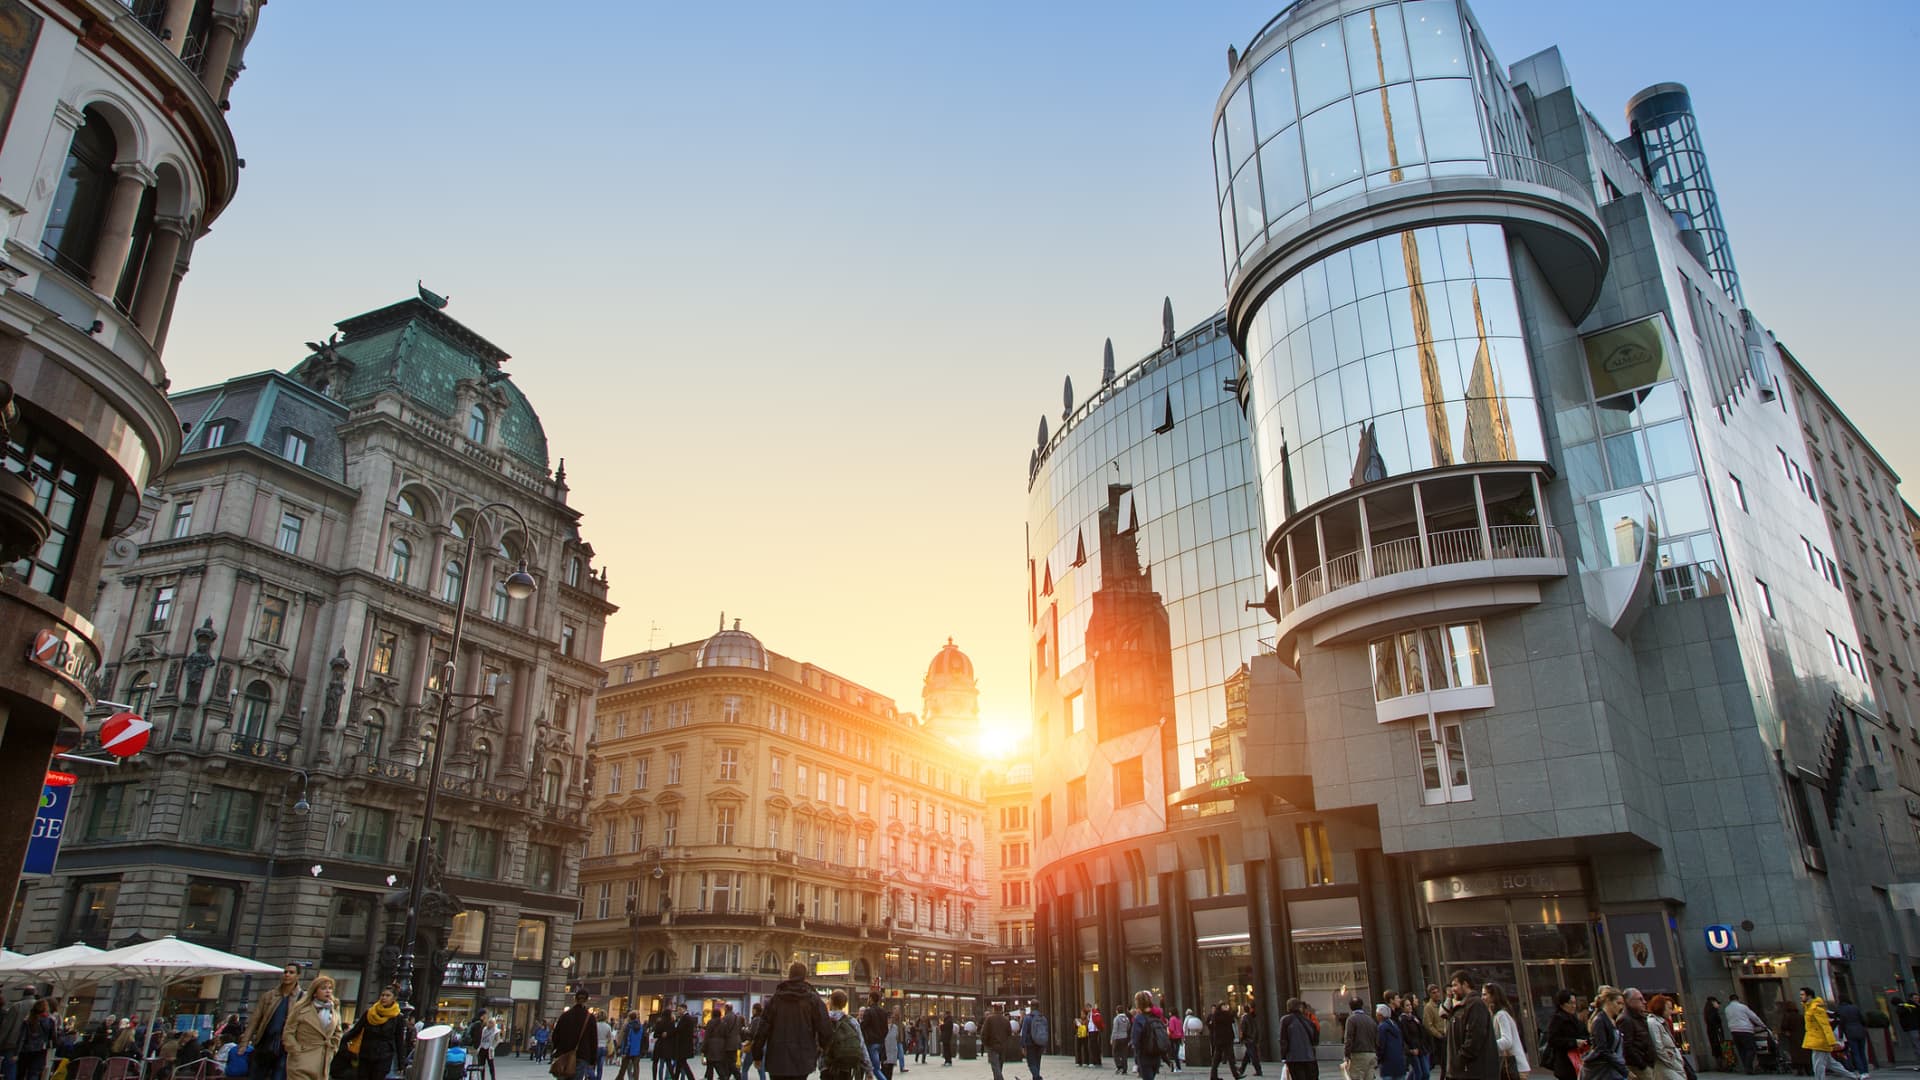 Vienna overtakes Auckland as the world’s most livable city